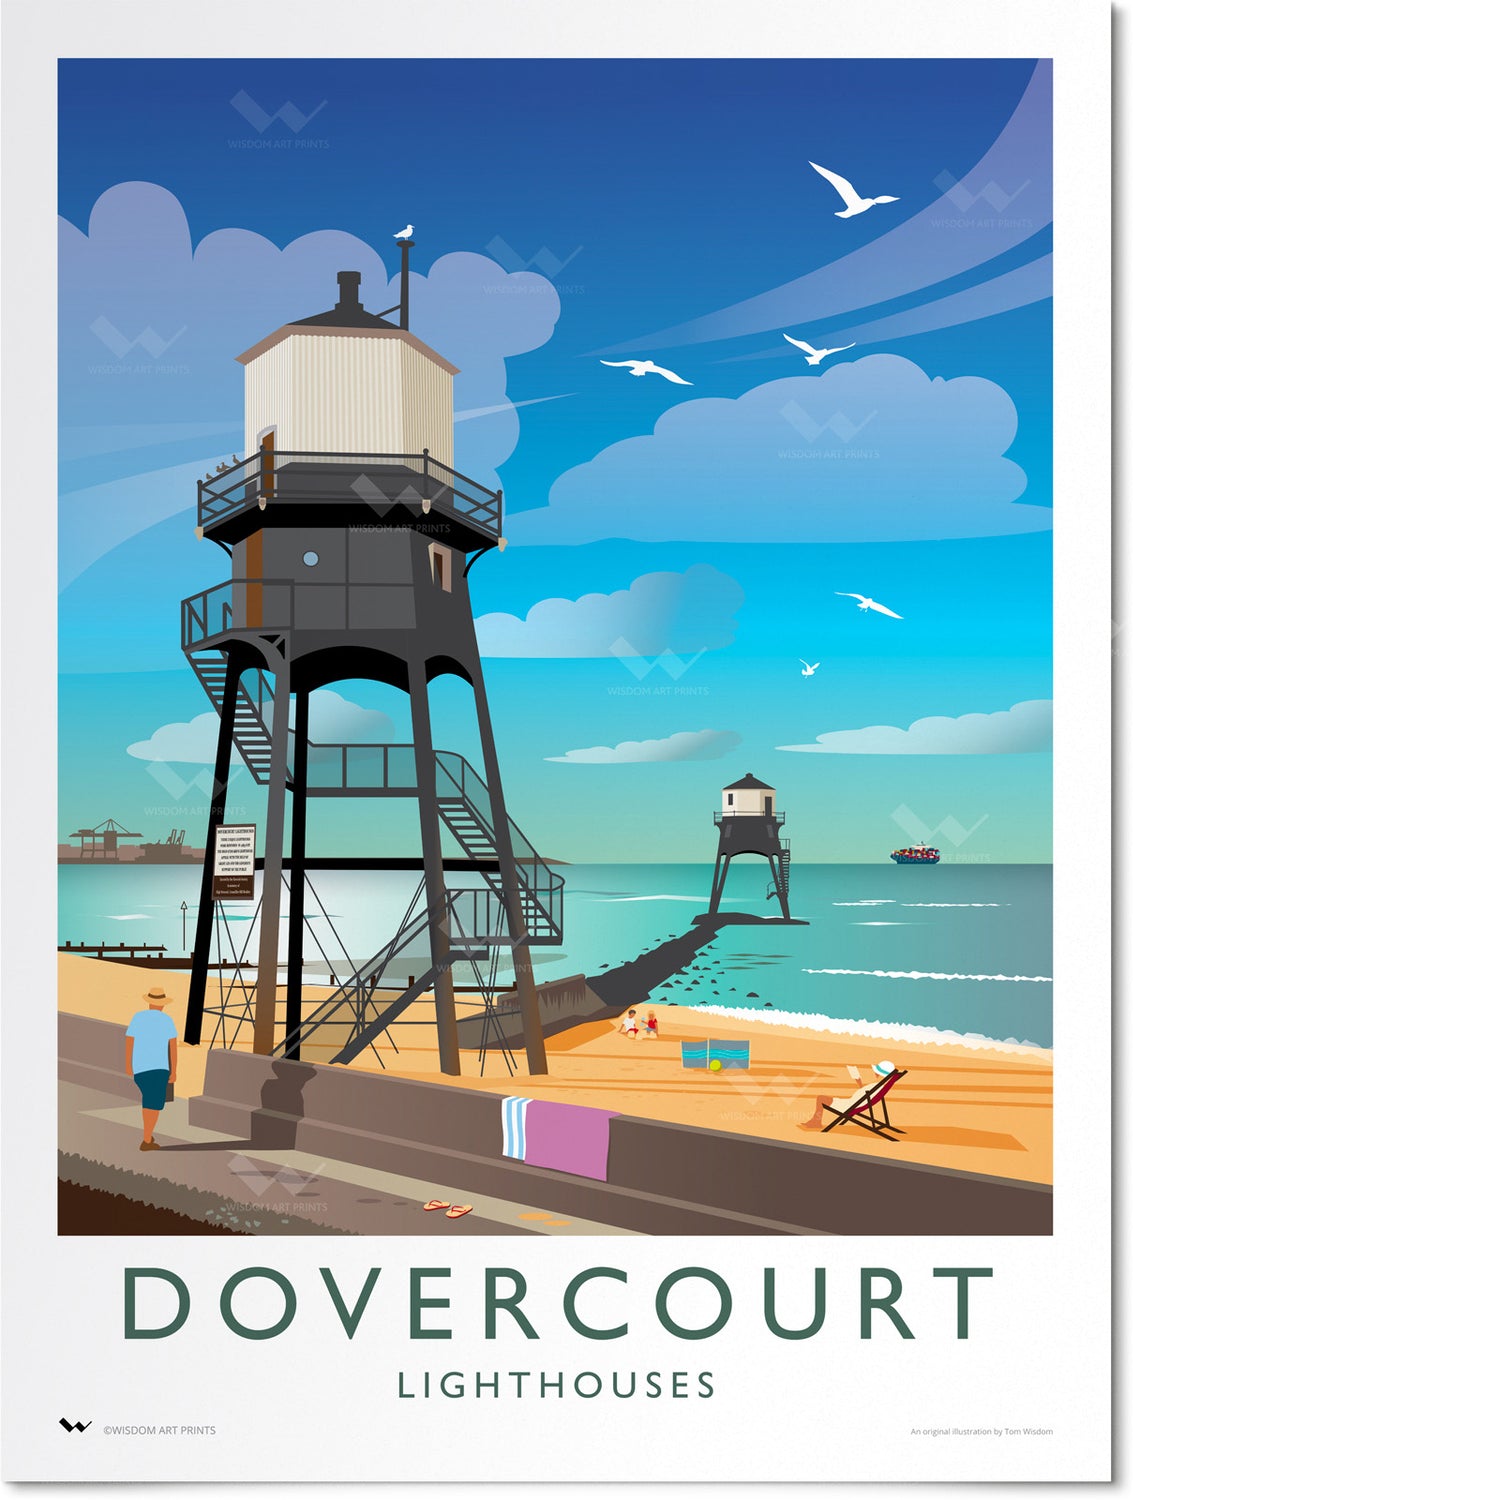 High and Low Lighthouses, Dovercourt Travel Poster